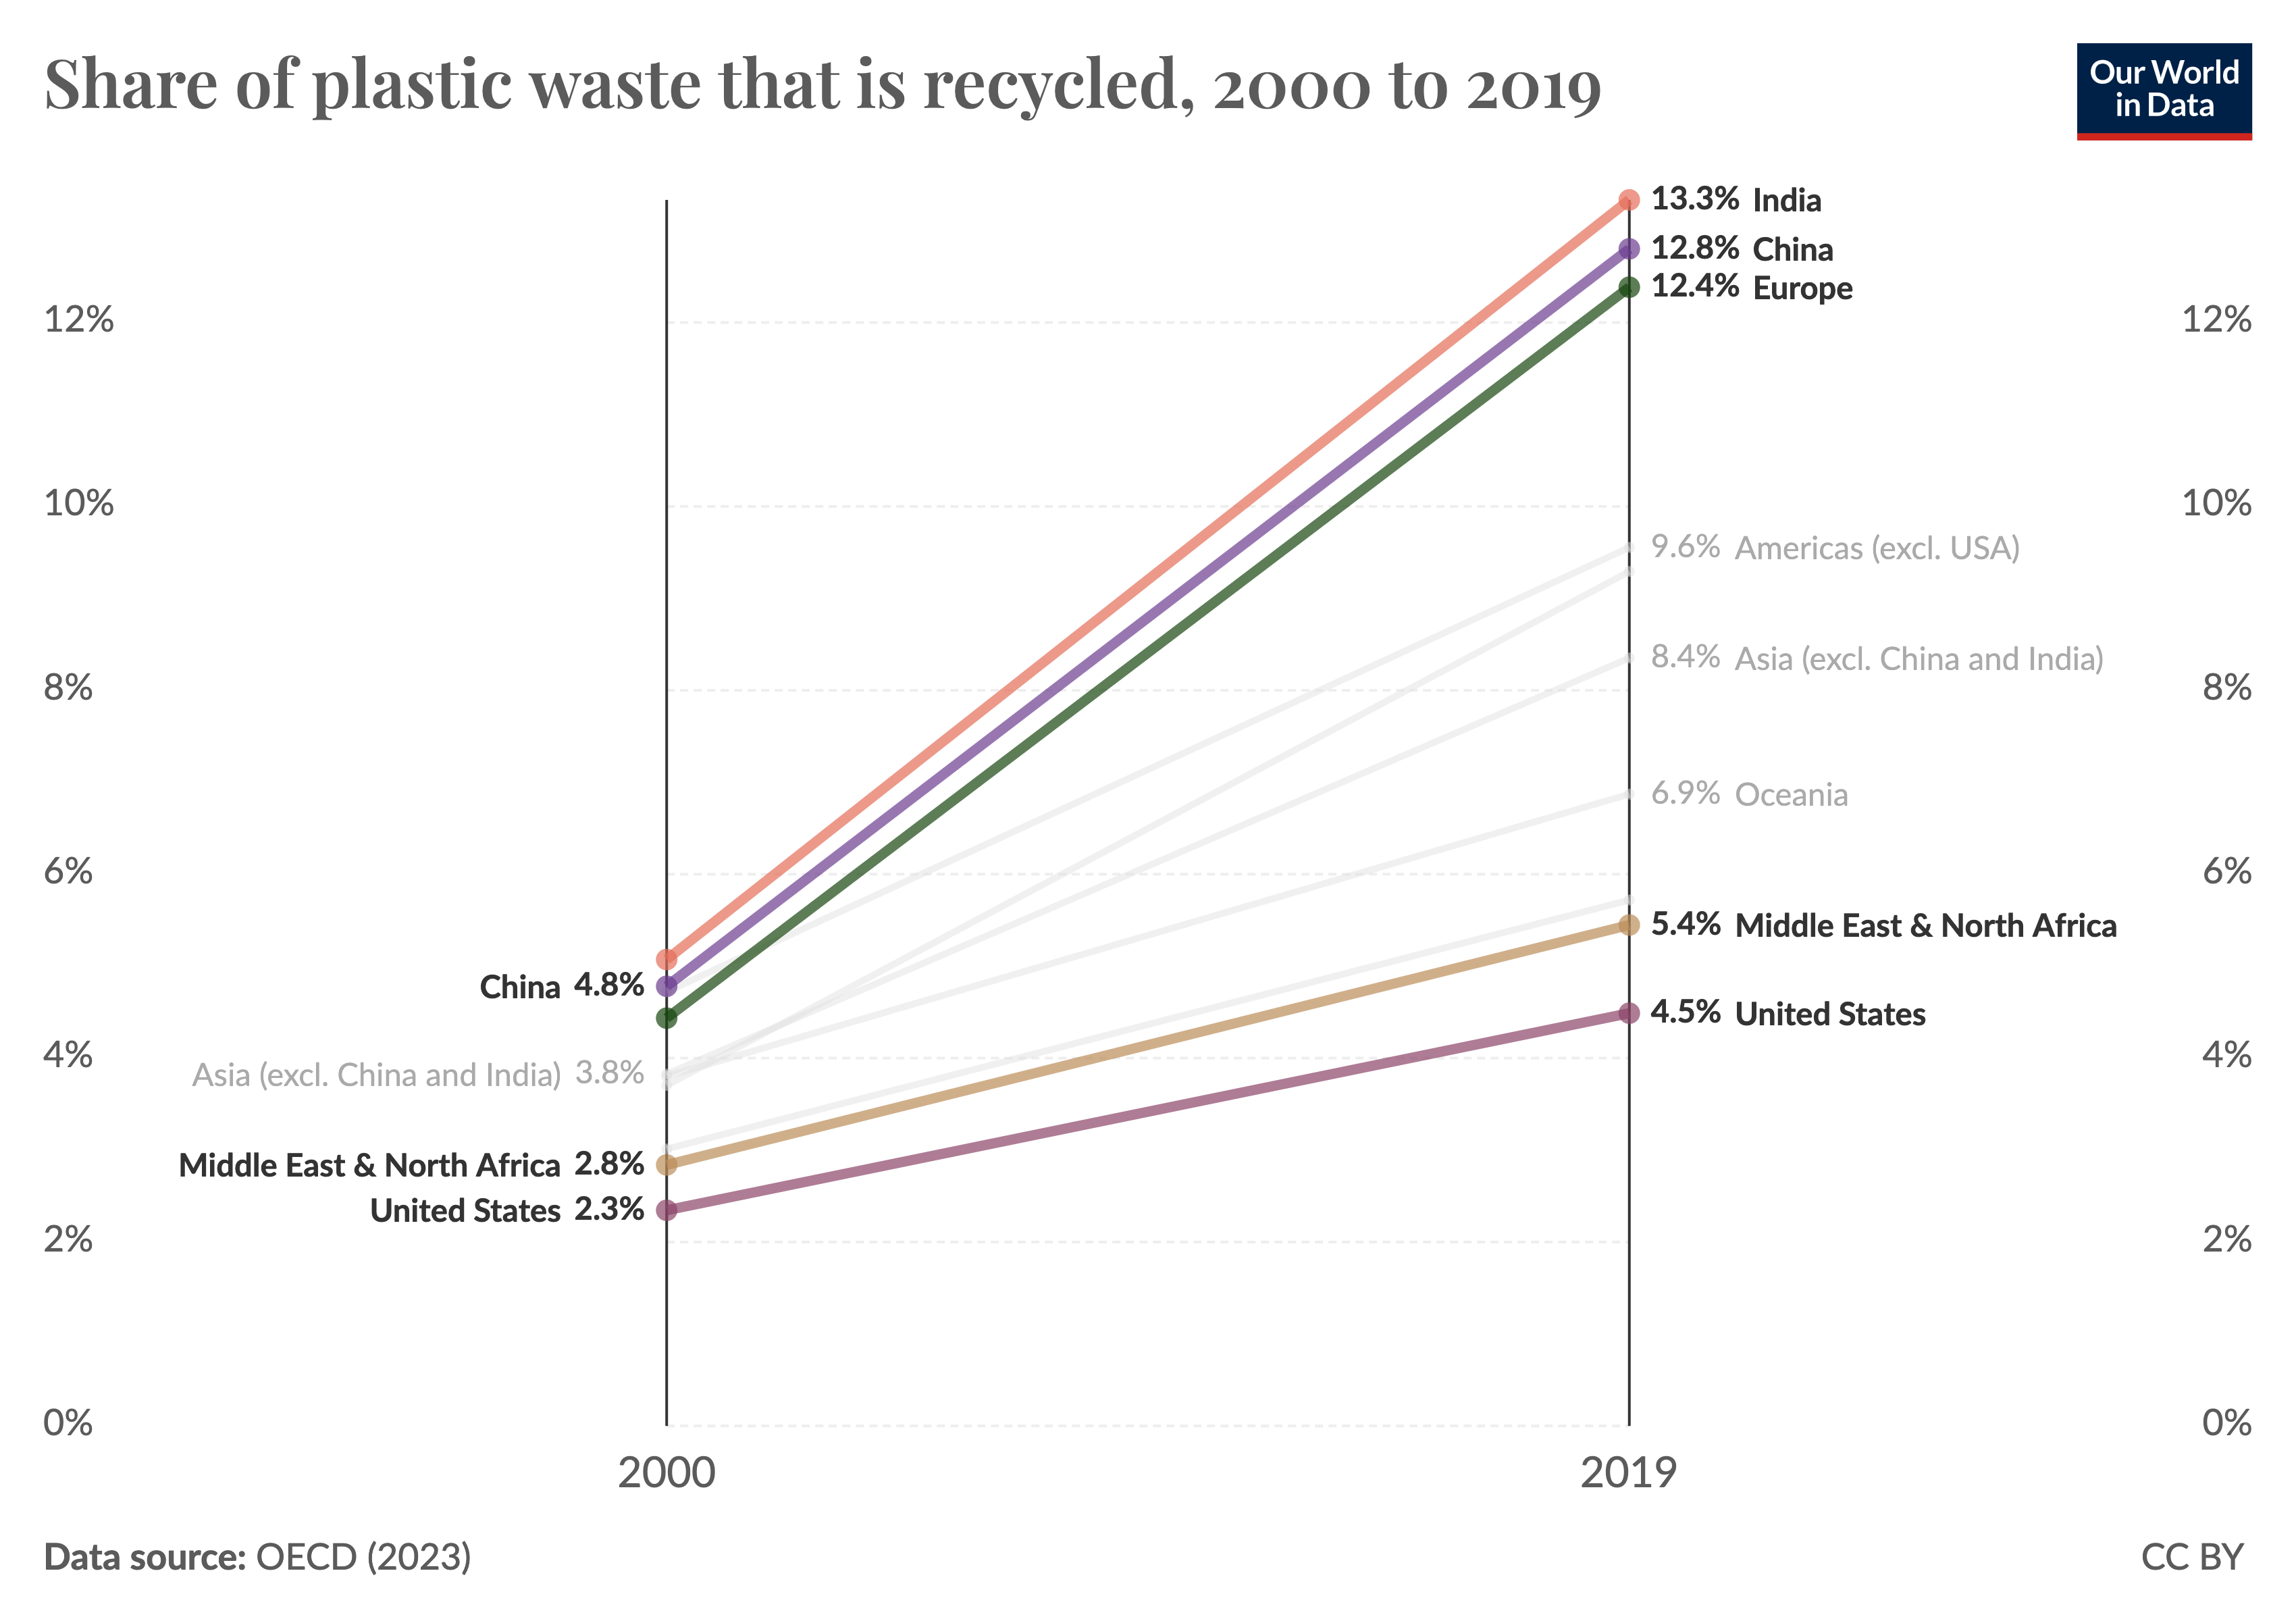 Plastic recycling rates are increasing, but slowly, in many regions